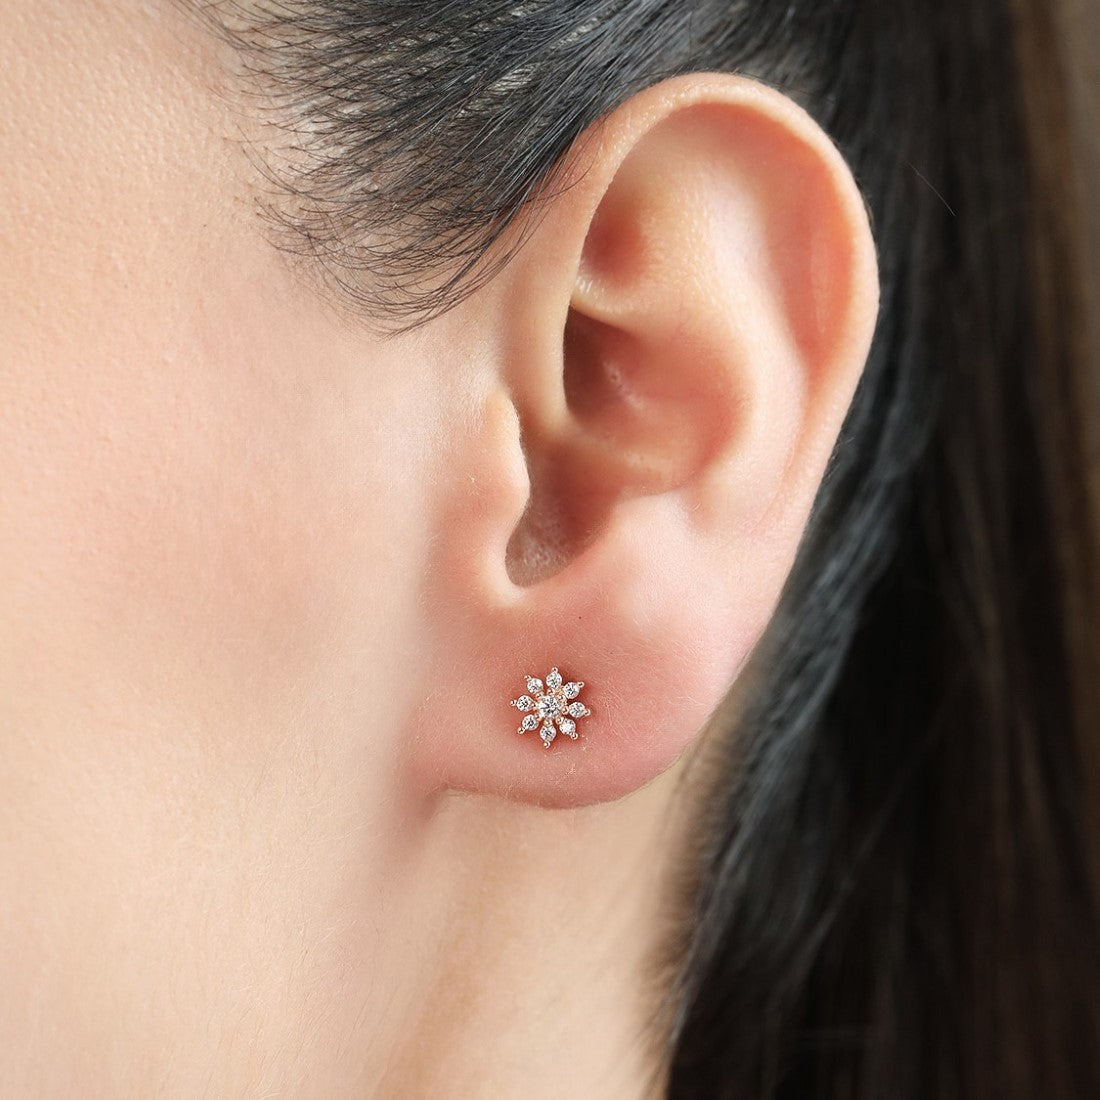 CZ Studded Floral Rose Gold 925 Sterling Silver Stud Earrings